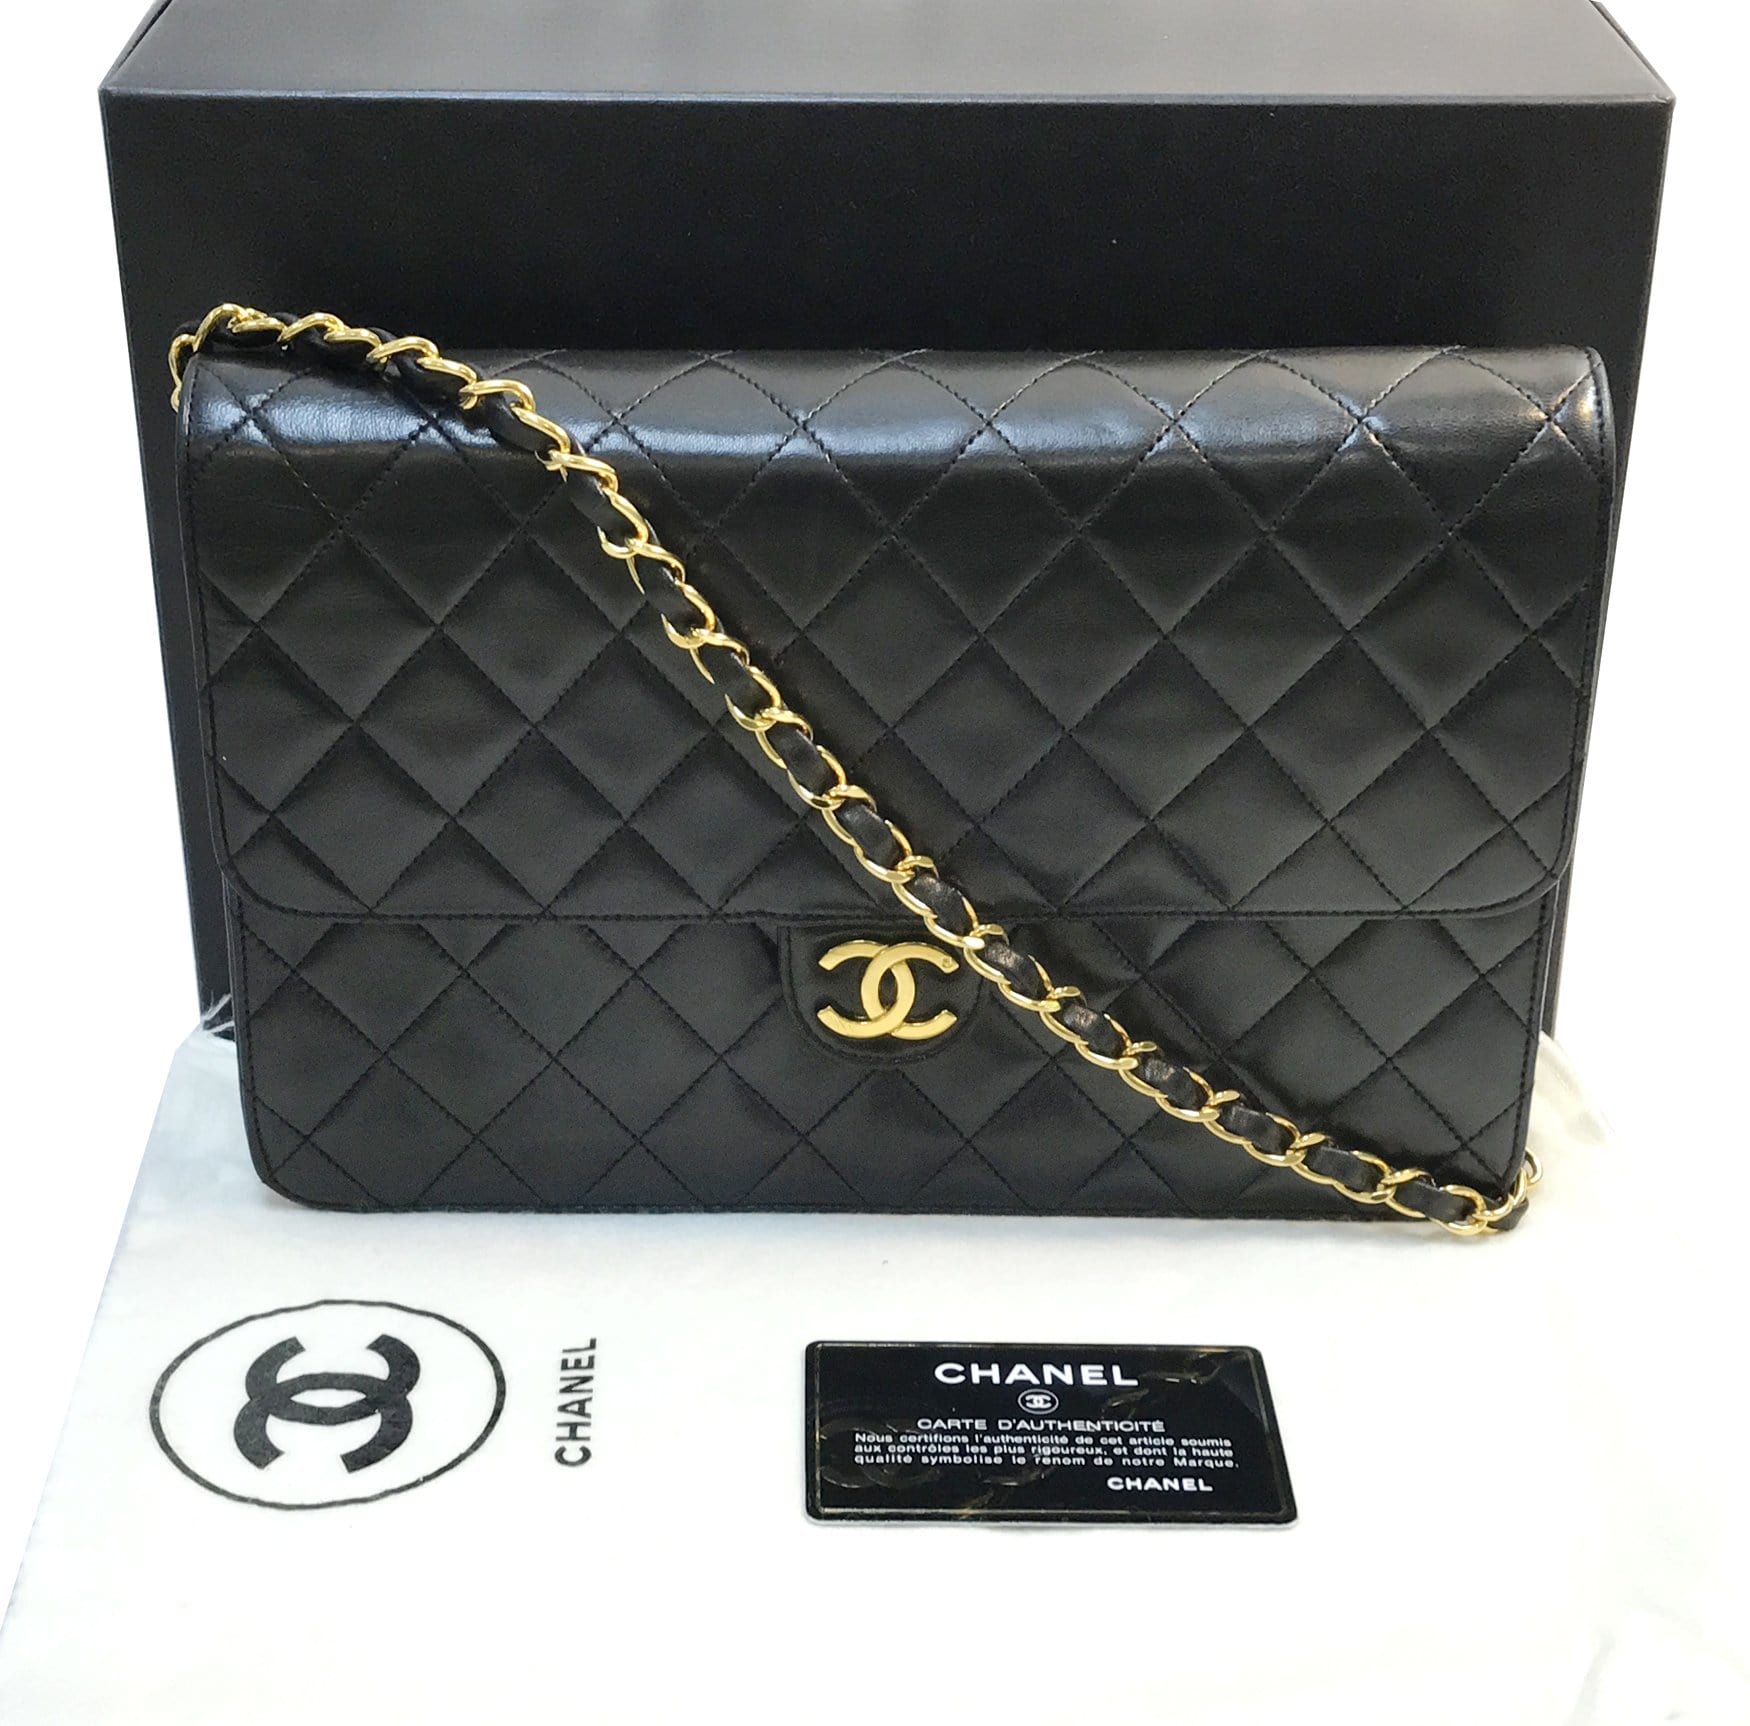 CHANEL – Page 4 – dct - ep_vintage luxury Store - Босоножки шлепки